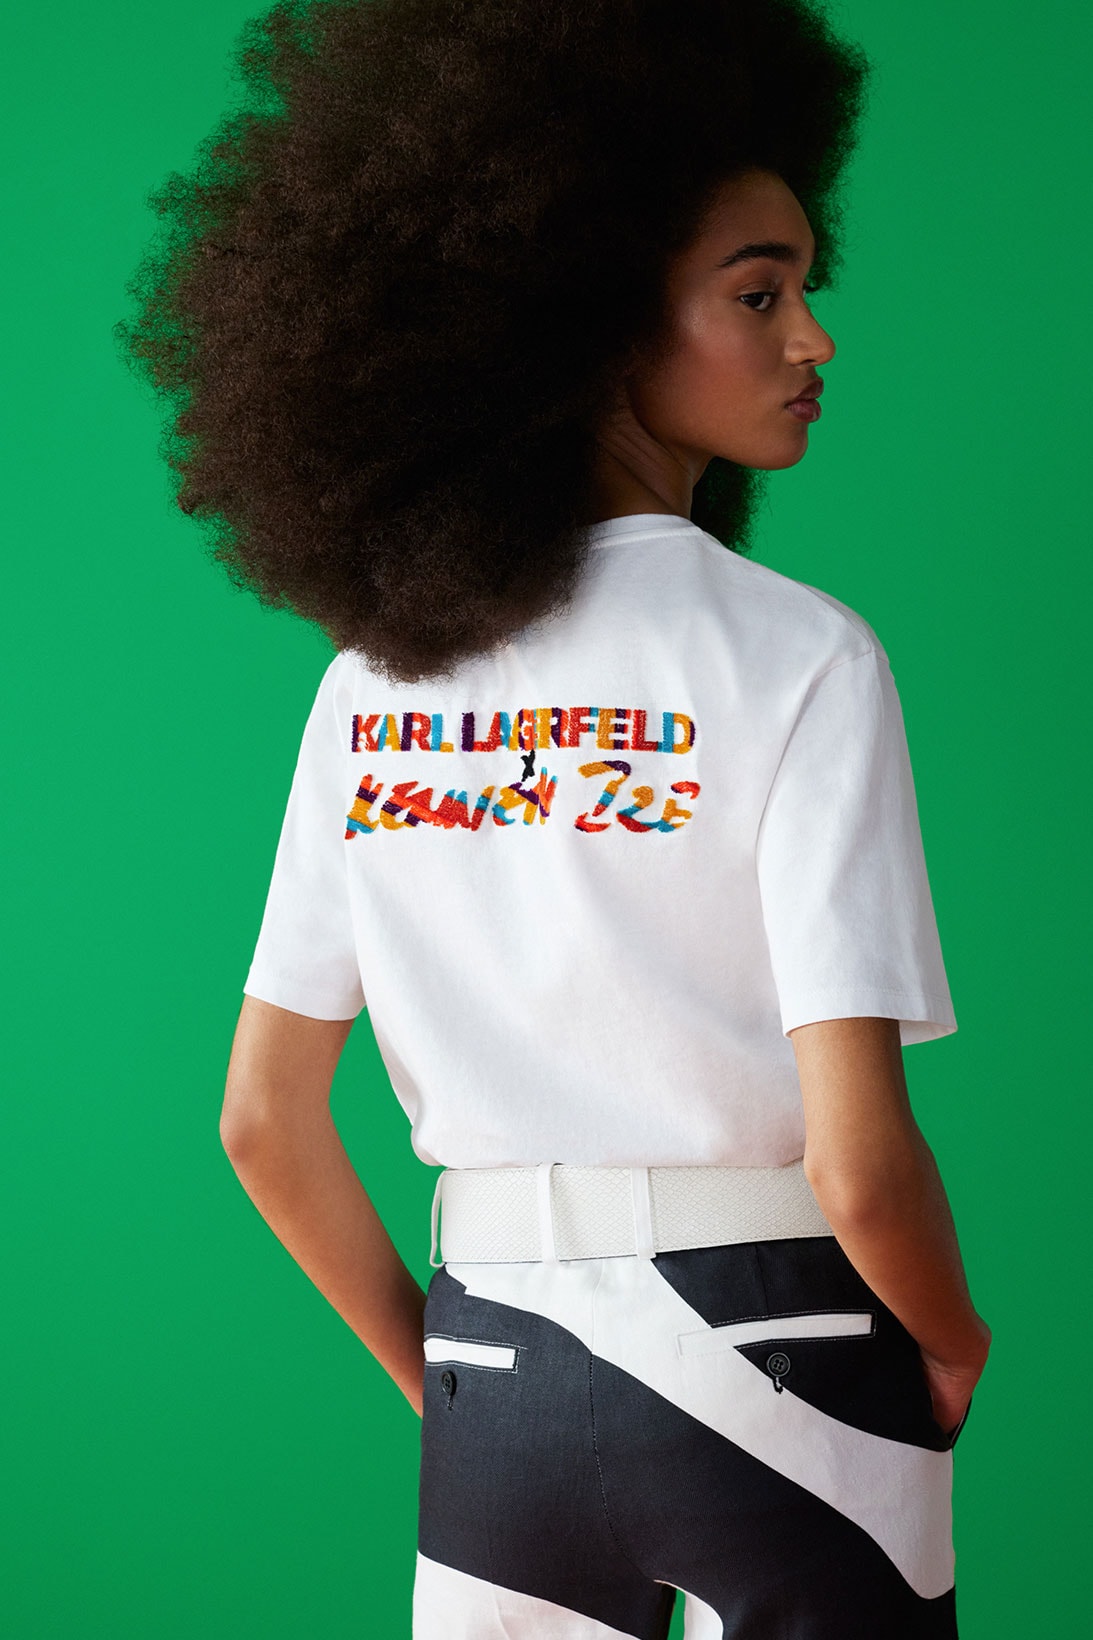 kenneth ize karl lagerfeld collaboration spring summer carine roitfeld sustainable knitwear release price where to buy